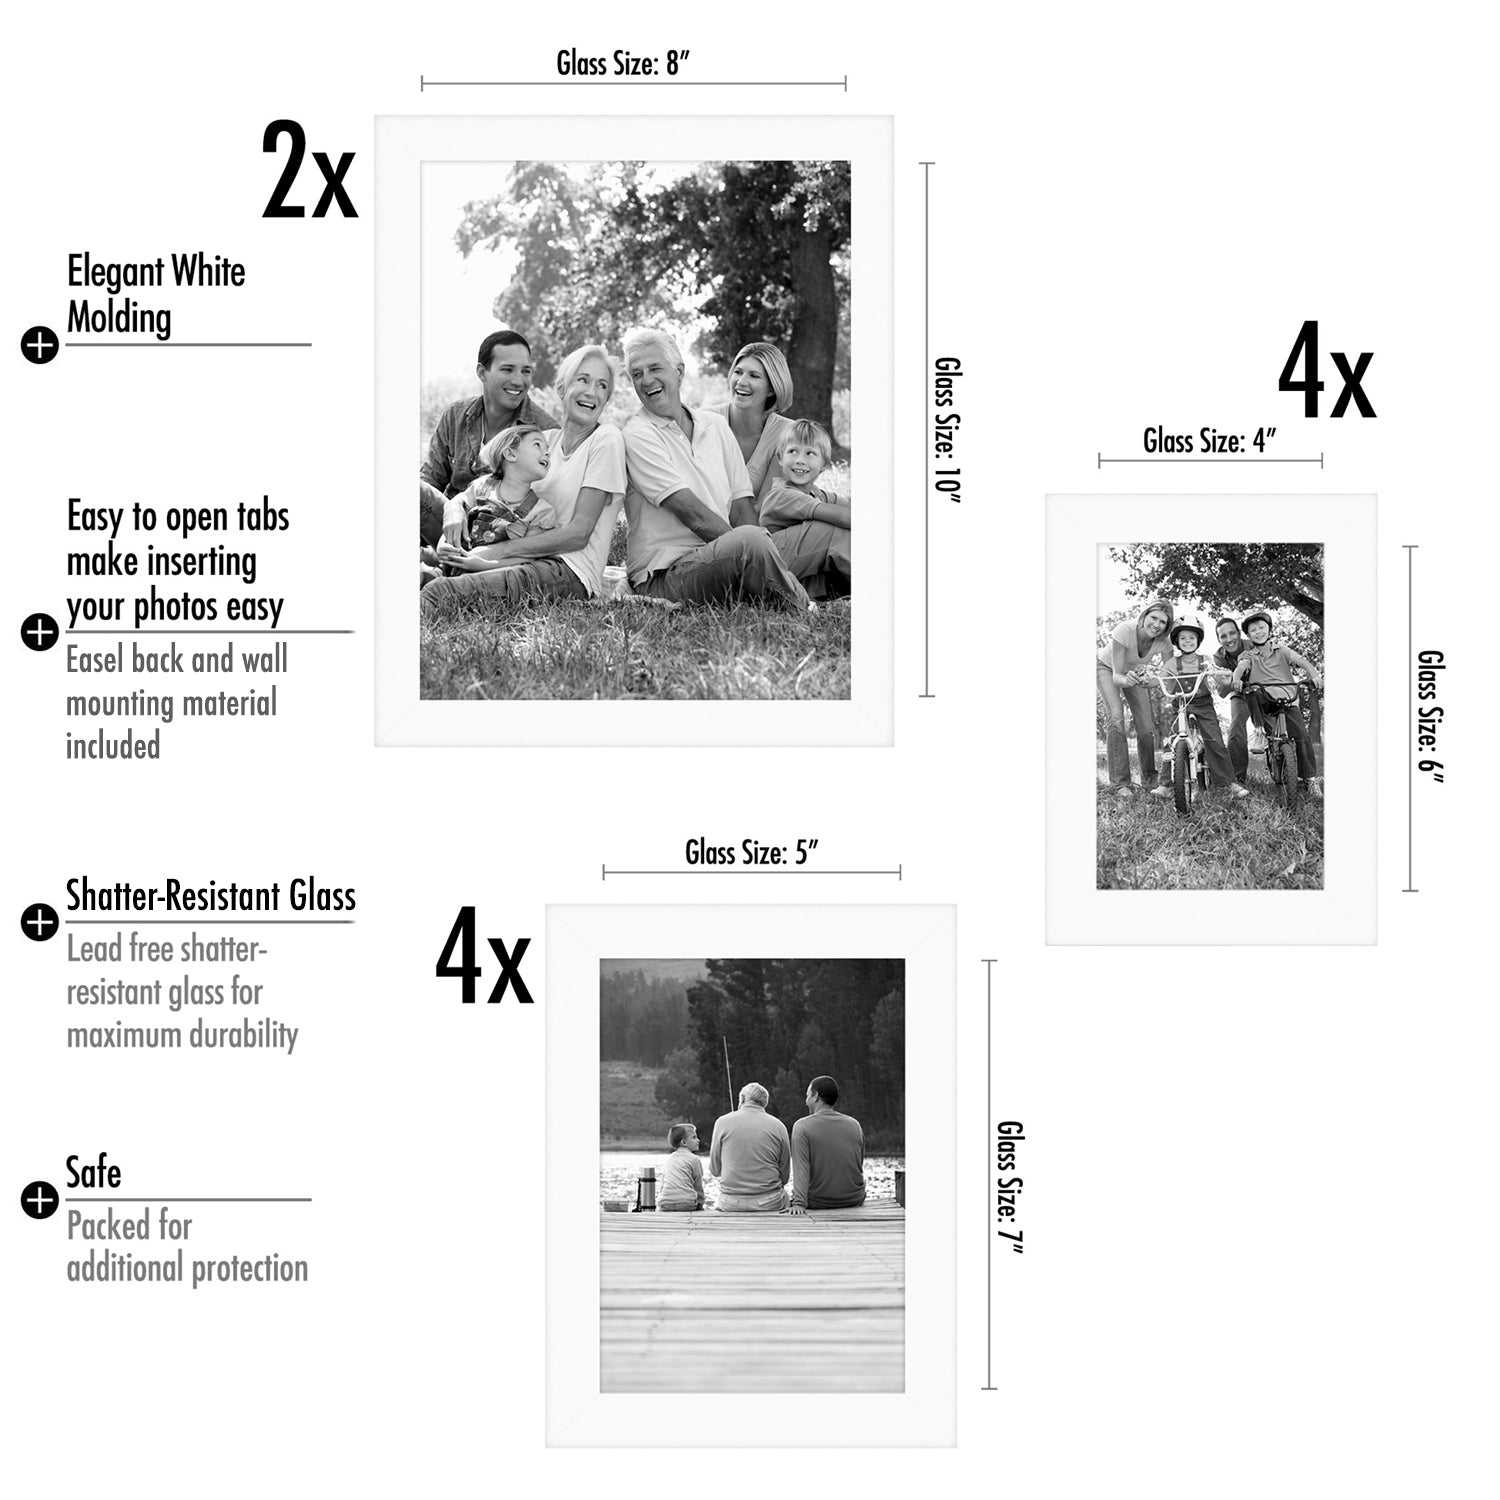 Brendolyn 10 Pack Picture Frames - Gallery Wall 8x10, 5x7, 4x6 Frames Latitude Run Color: White